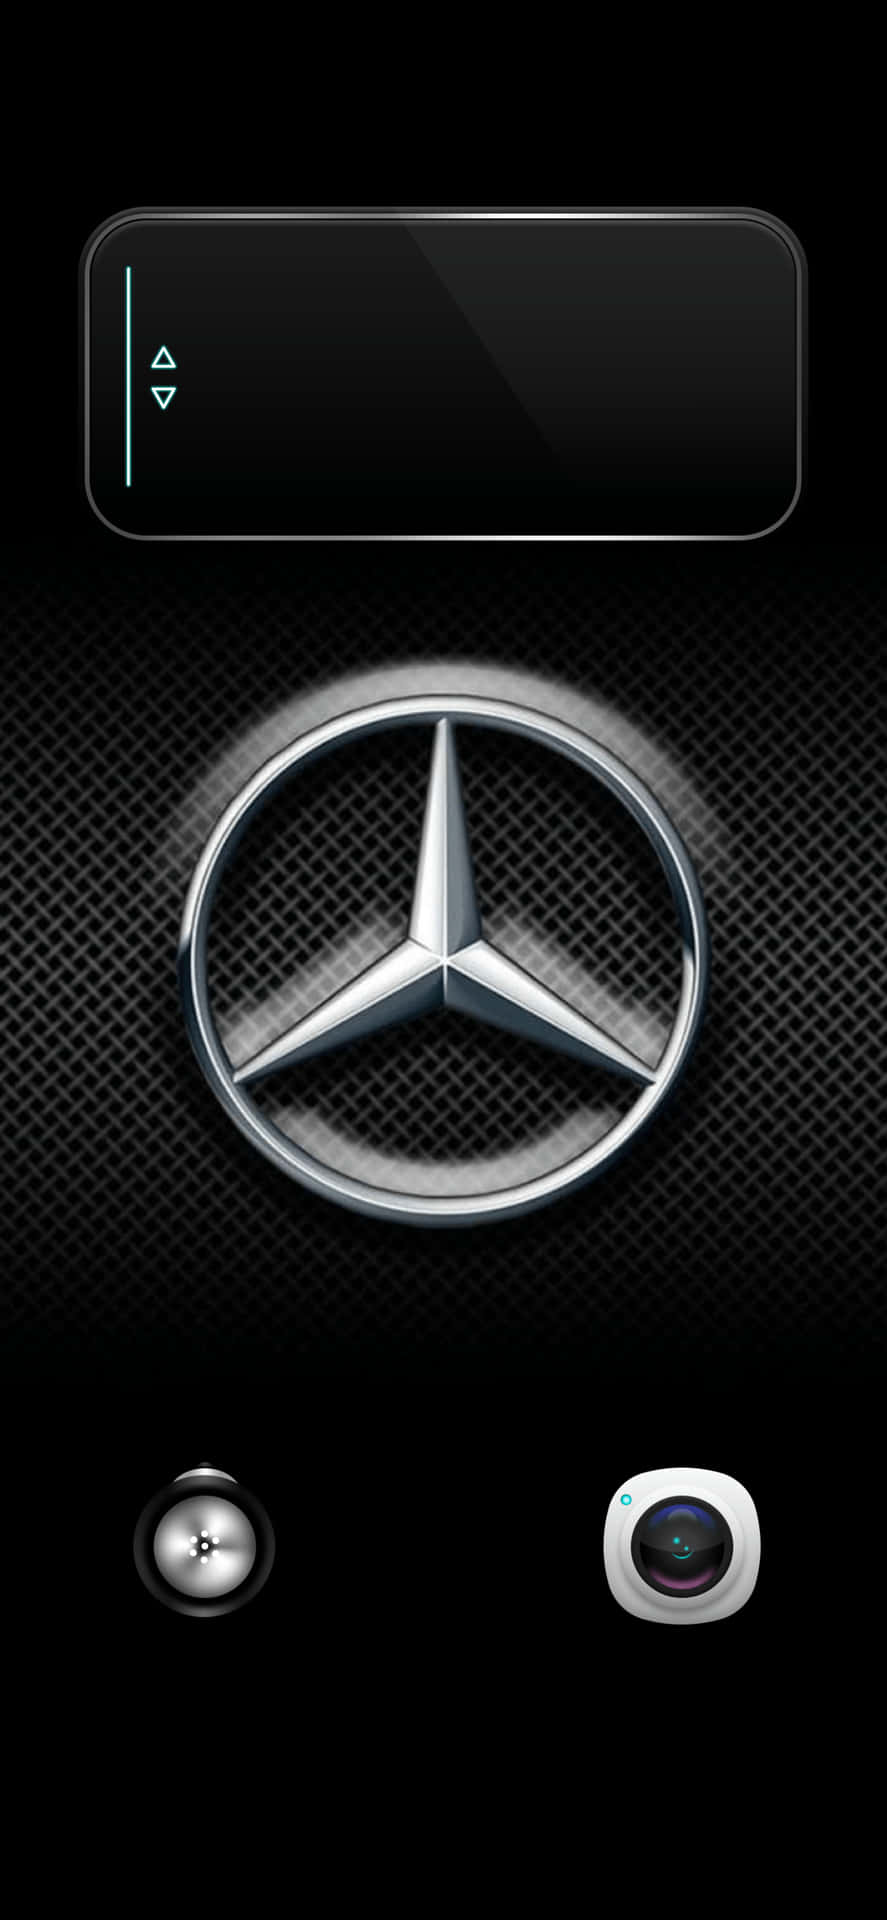 Iphone Xs Mercedes Background Logo On The Dashboard Background